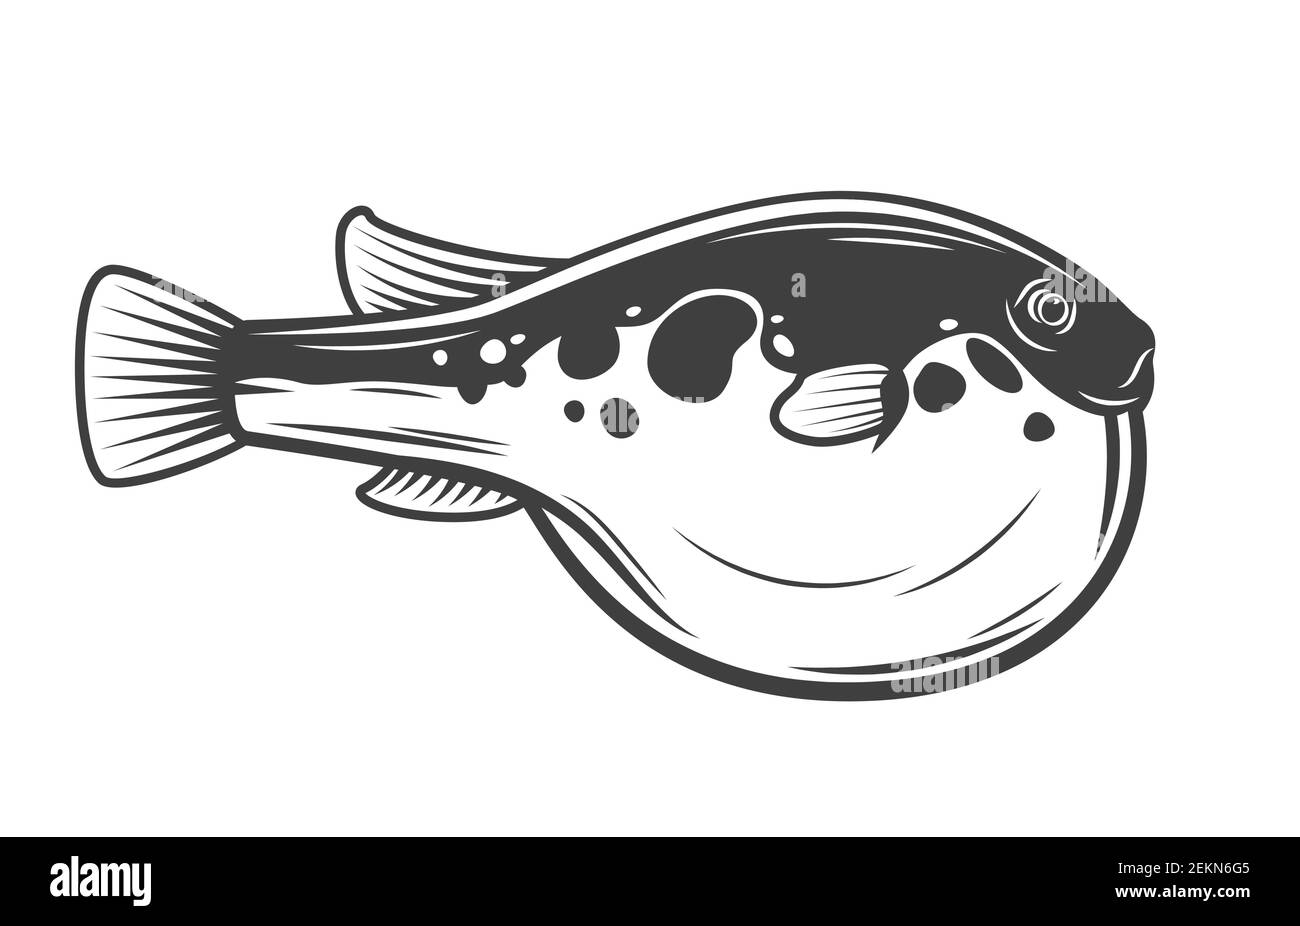 Japanese Fugu fish, isolated pufferfish. Vector poisonous fish with puffed stomach, exotic toxic marine animal. Seaweed, Japanese cuisine delicacy, bo Stock Vector